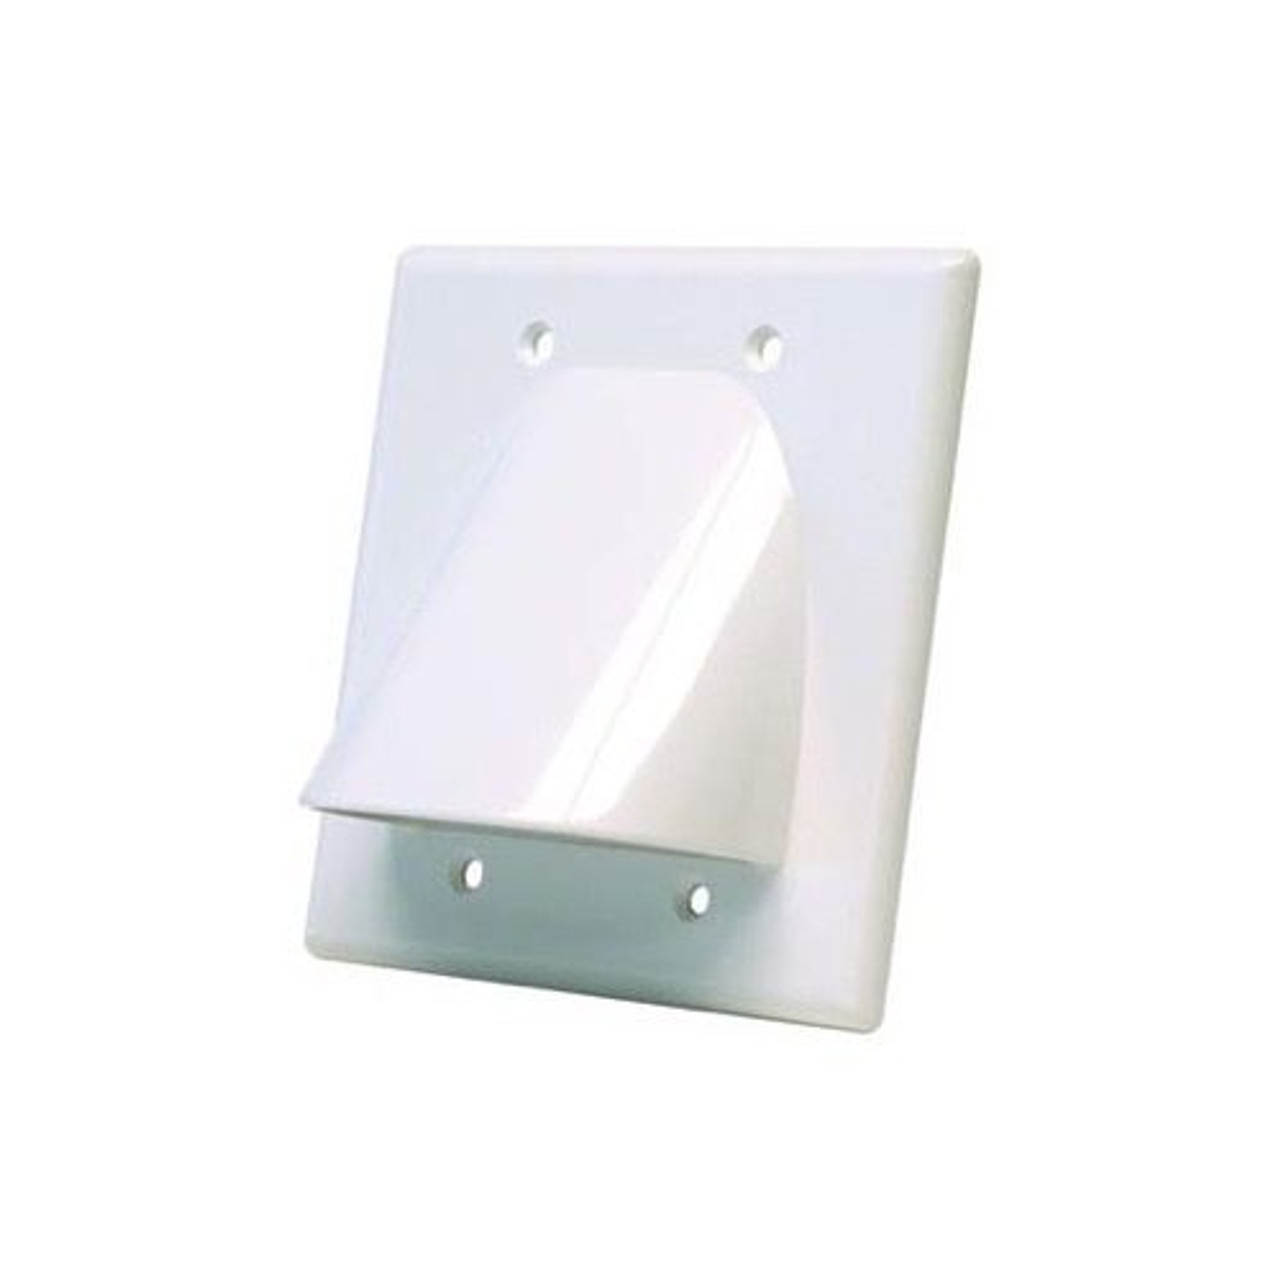 Vanco WPBW2WX Dual Gang Bulk Cable Wall Plate White (2) Gang Relaxed Satellite Ribbon 2 Gang Face Plate Flush Mount, Audio Video Data Junction, Part # WPBW2WX